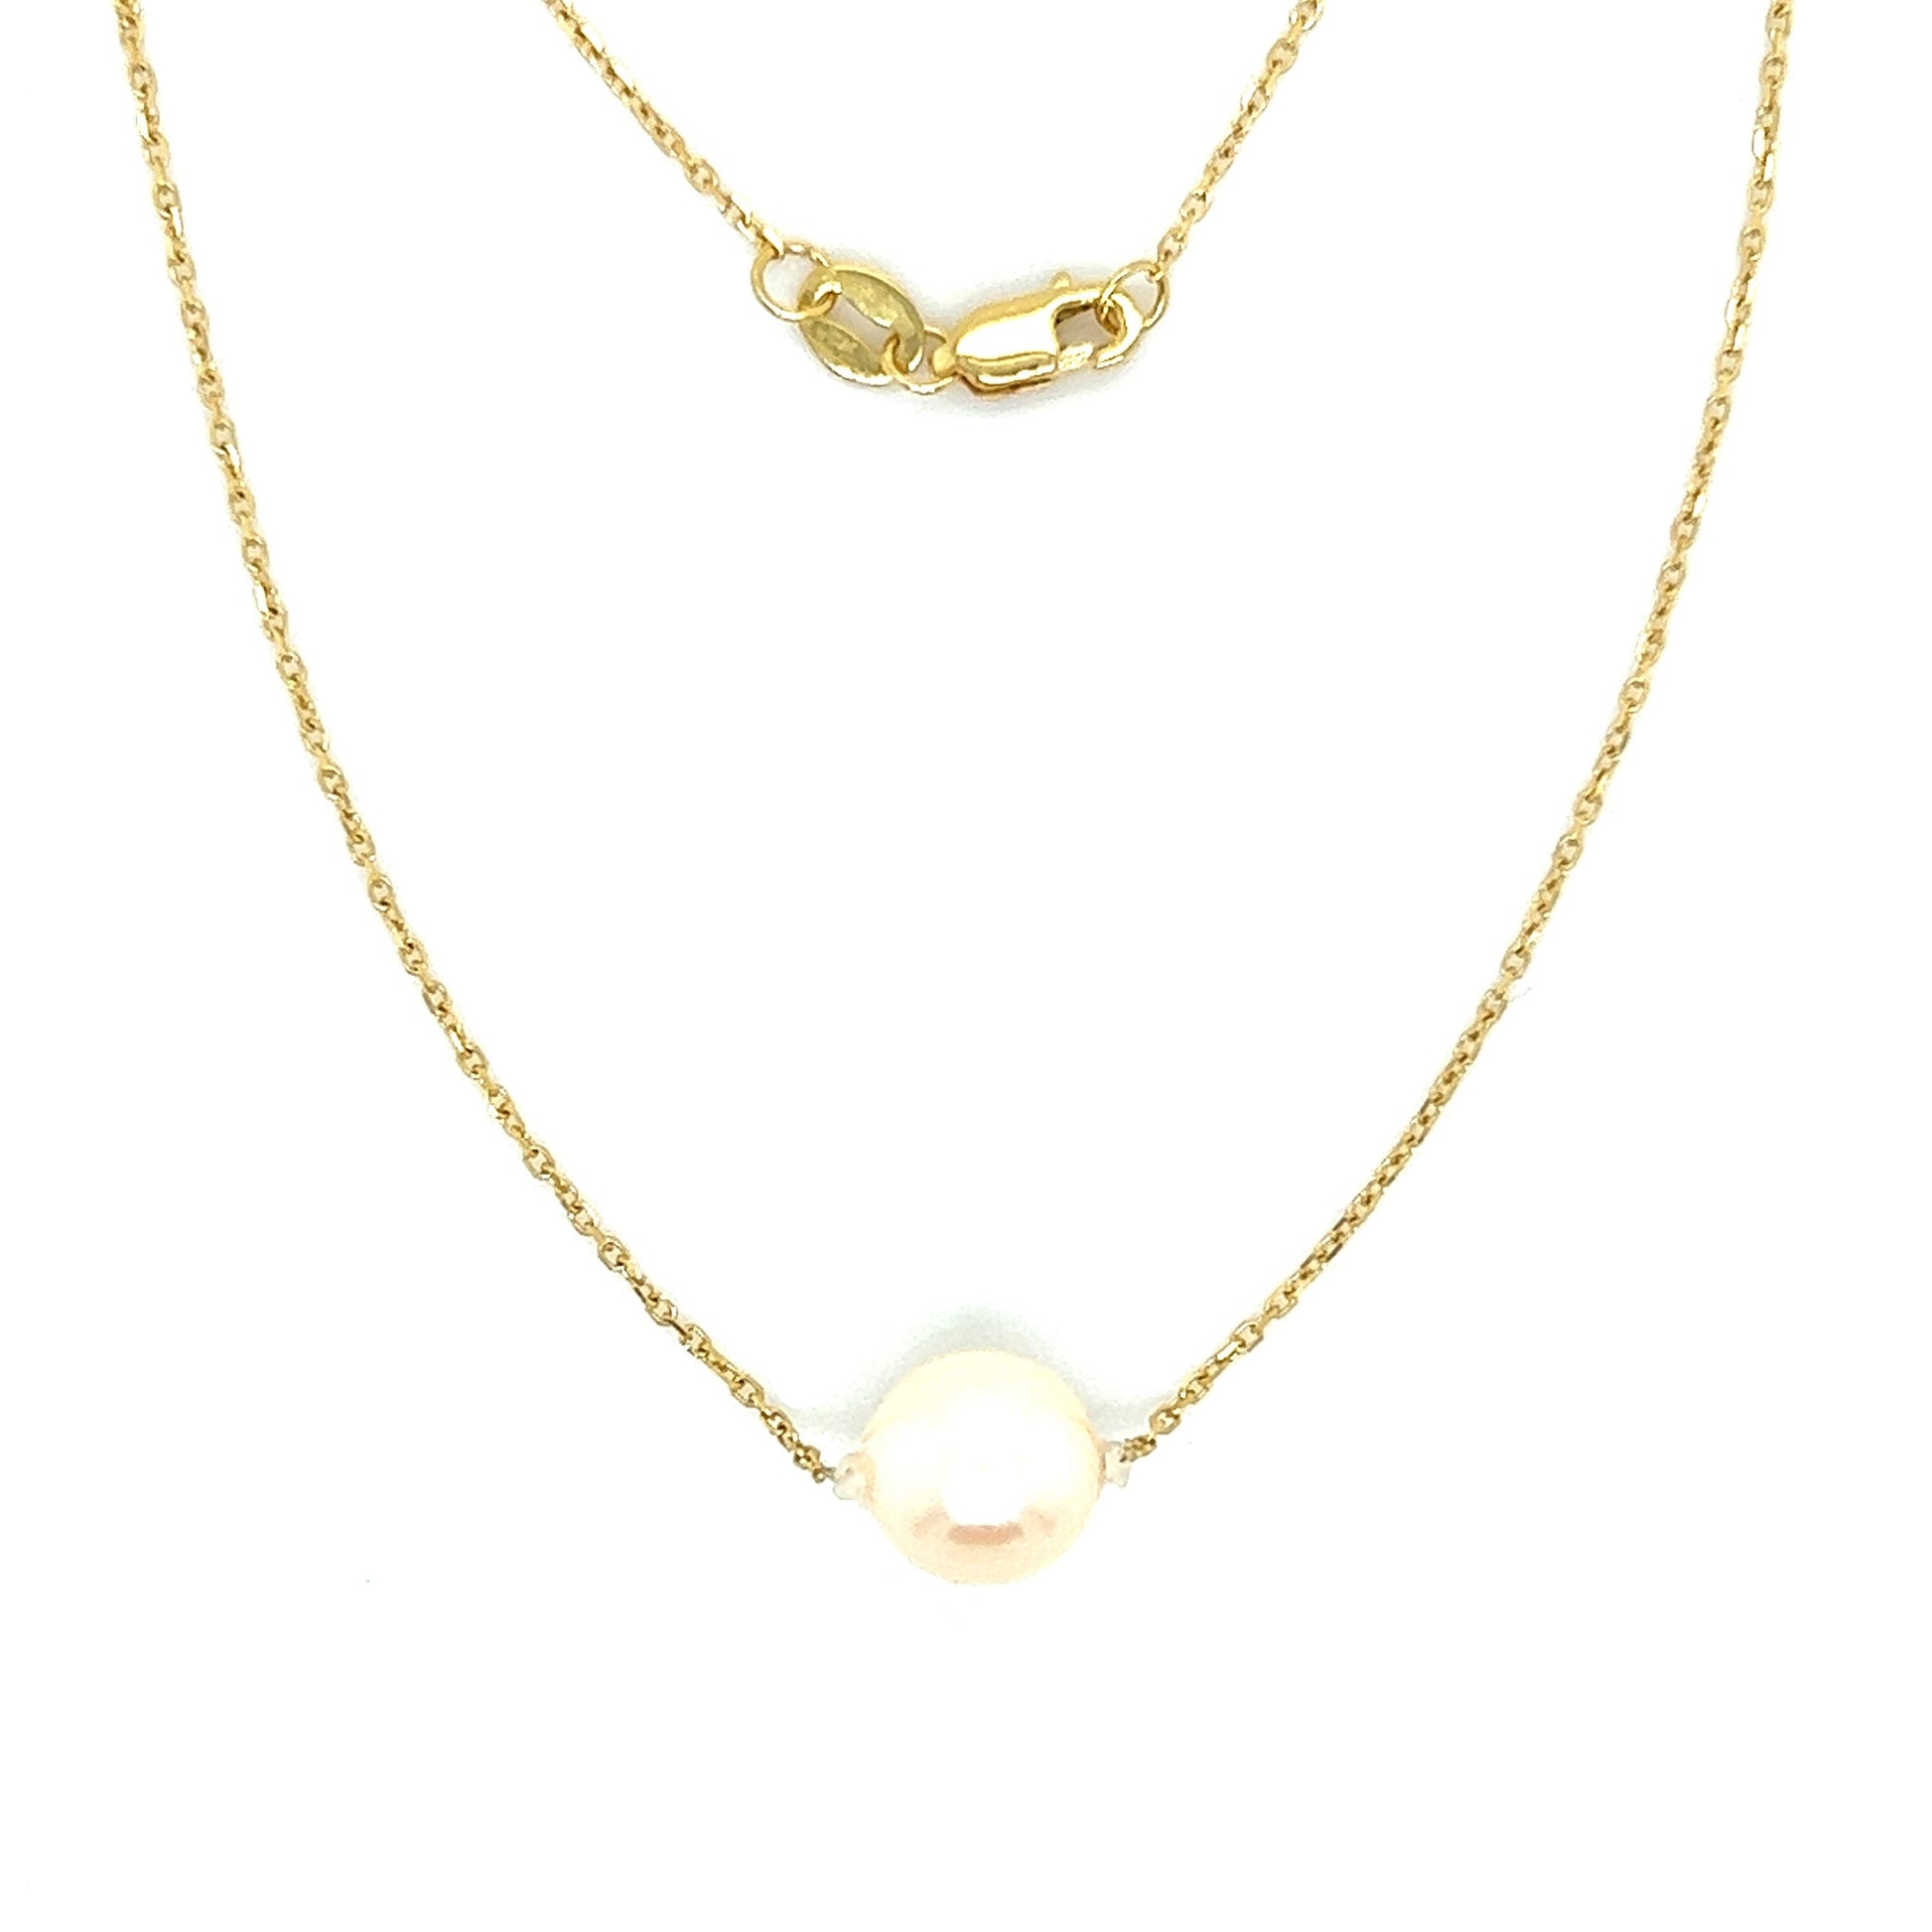 Add-a-Pearl Necklace with One 7mm White Pearl in 14K Yellow Gold